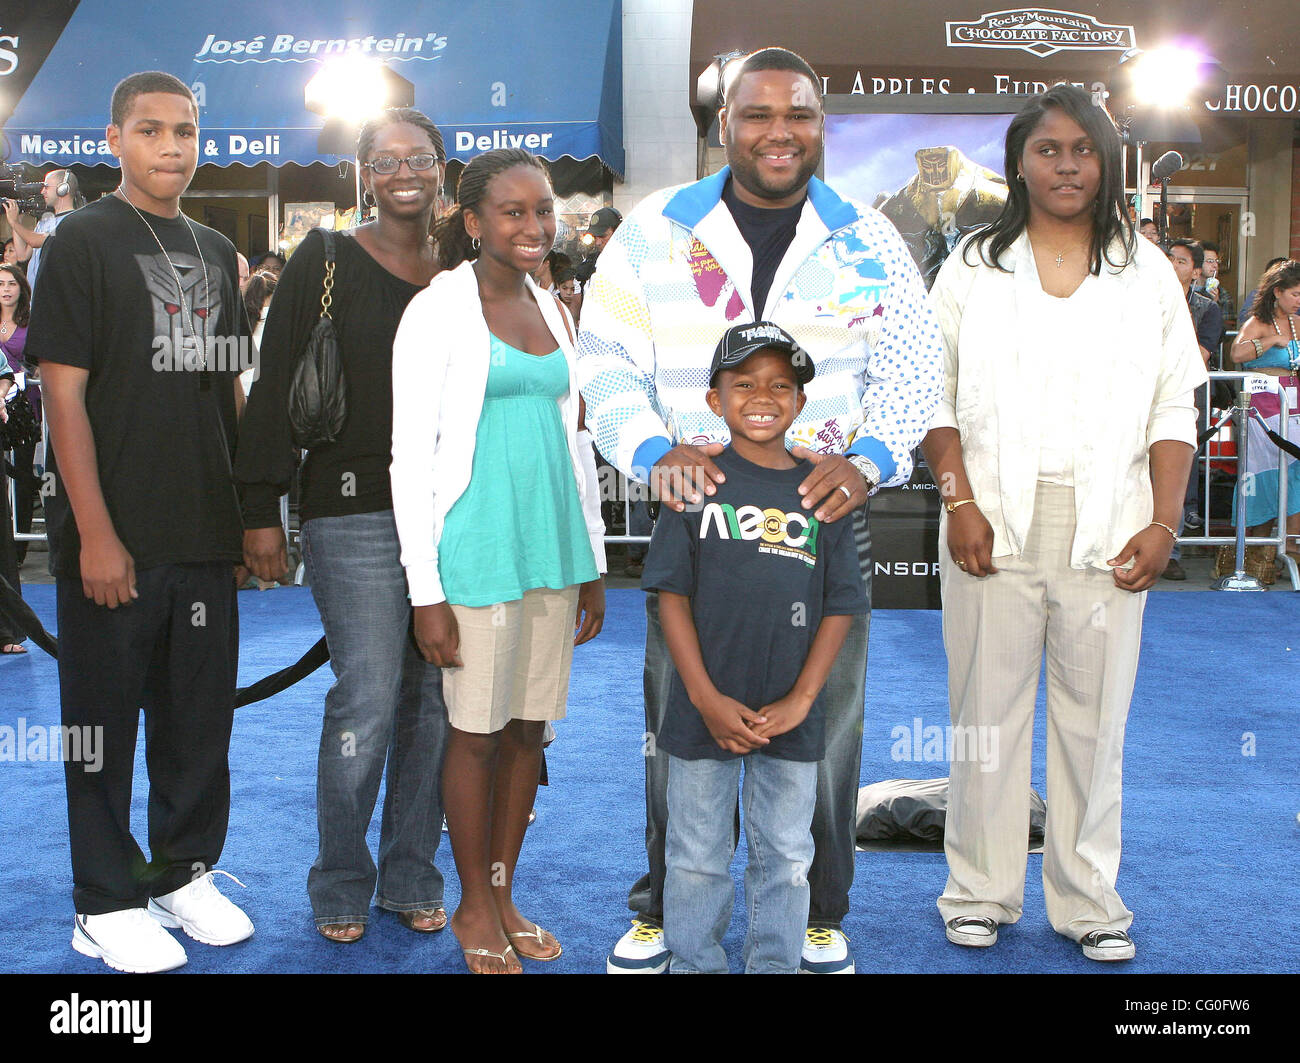 Jun 27, 2007; Hollywood, California, USA;  Actor ANTHONY ANDERSON and family  at the Hollywood Premiere of ' Transformers' held at Mann's Village Theater. Mandatory Credit: Photo by Paul Fenton/ZUMA Press. (©) Copyright 2007 by Paul Fenton Stock Photo